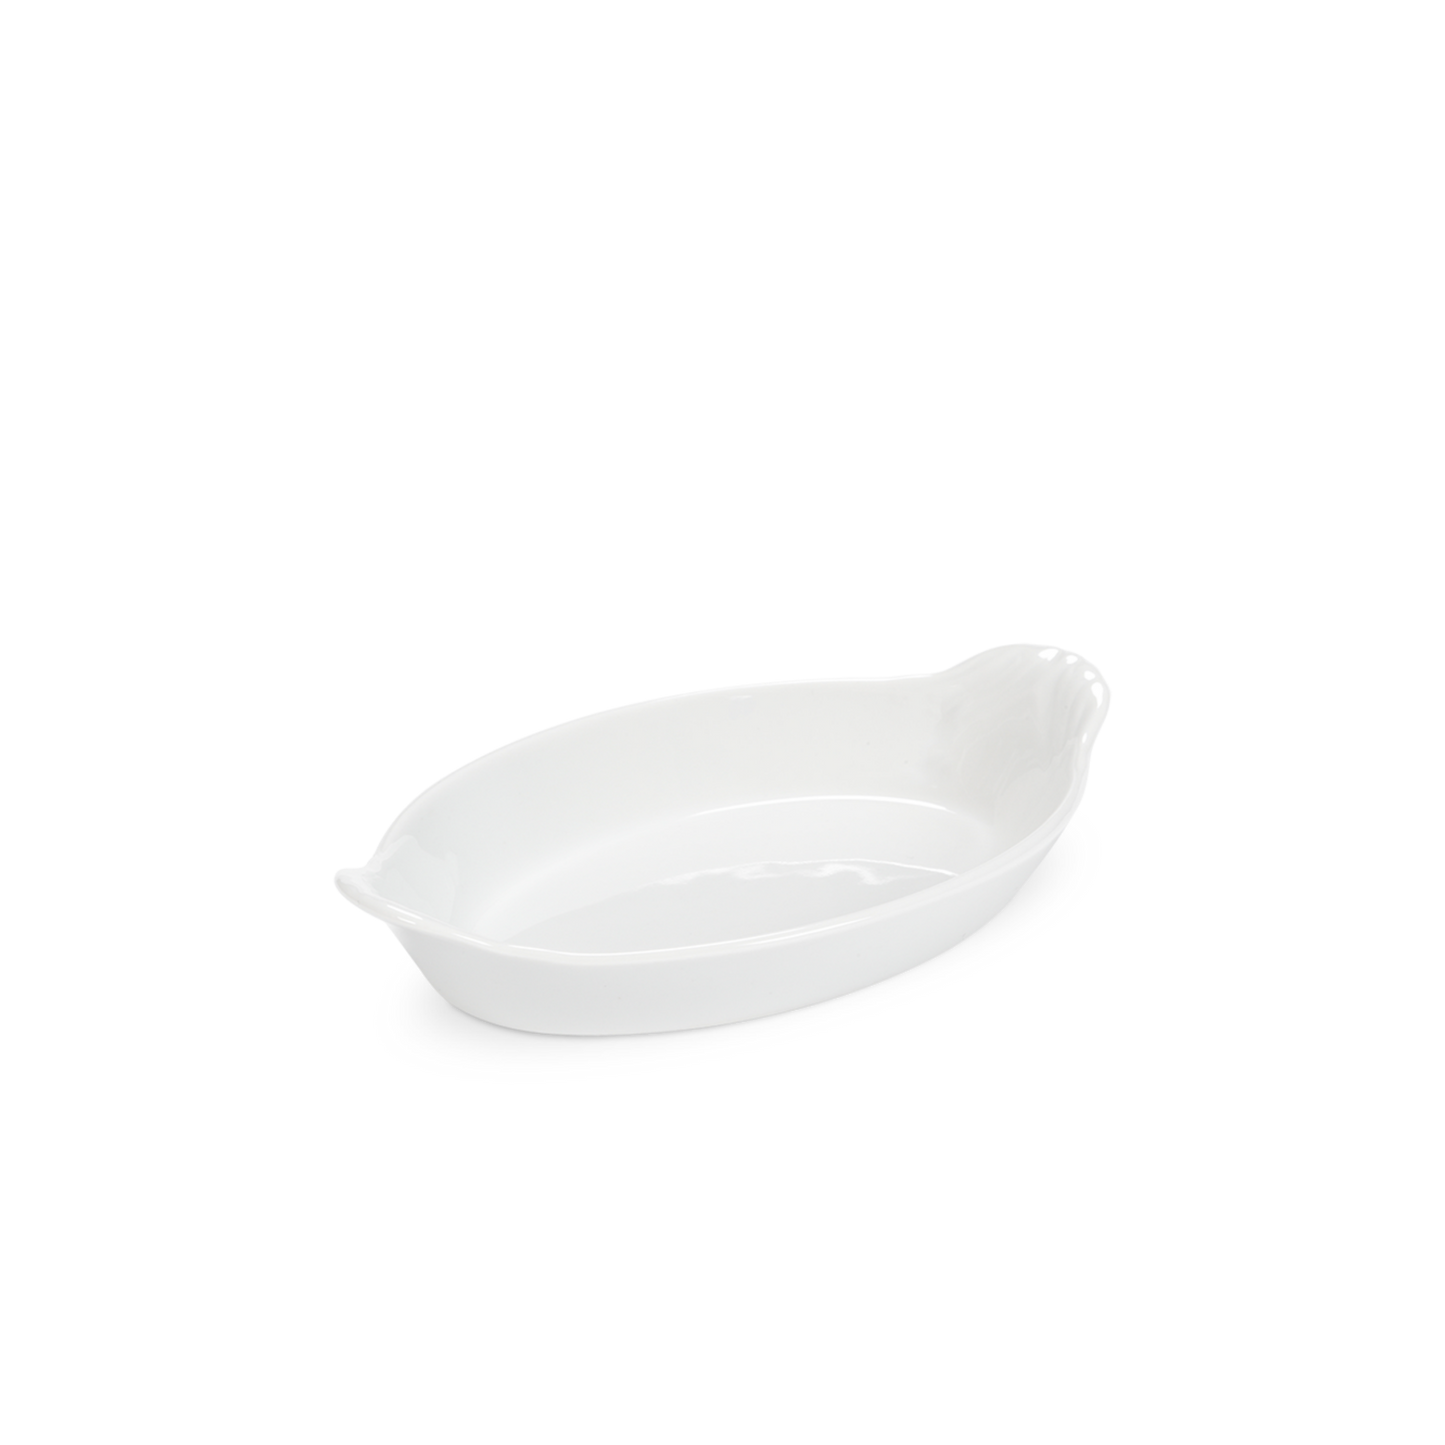 Oval Eared Dishes